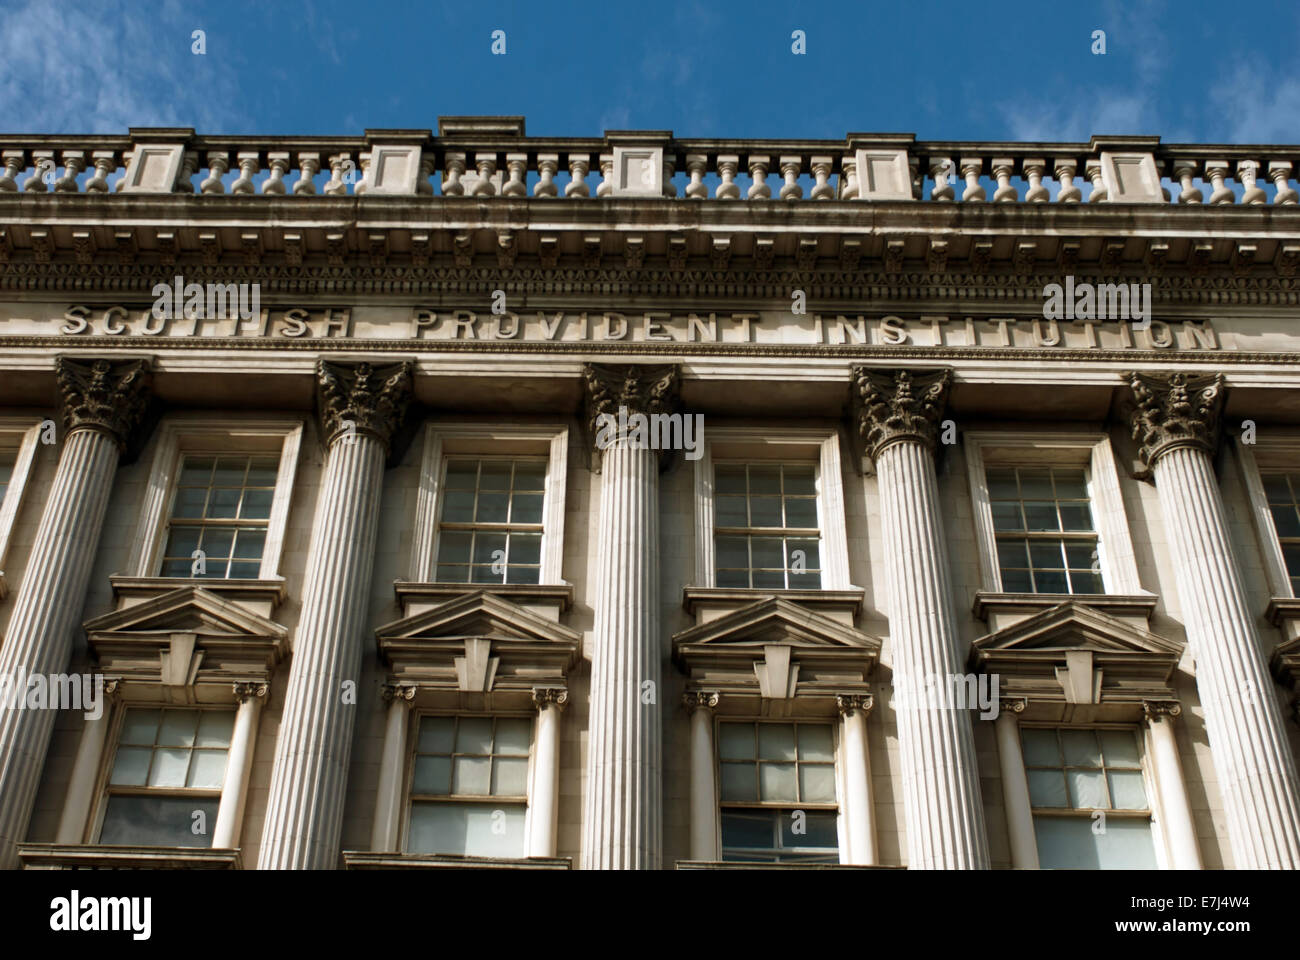 Former Scottish Provident Institution building, Mosely Street, Newcastle Stock Photo